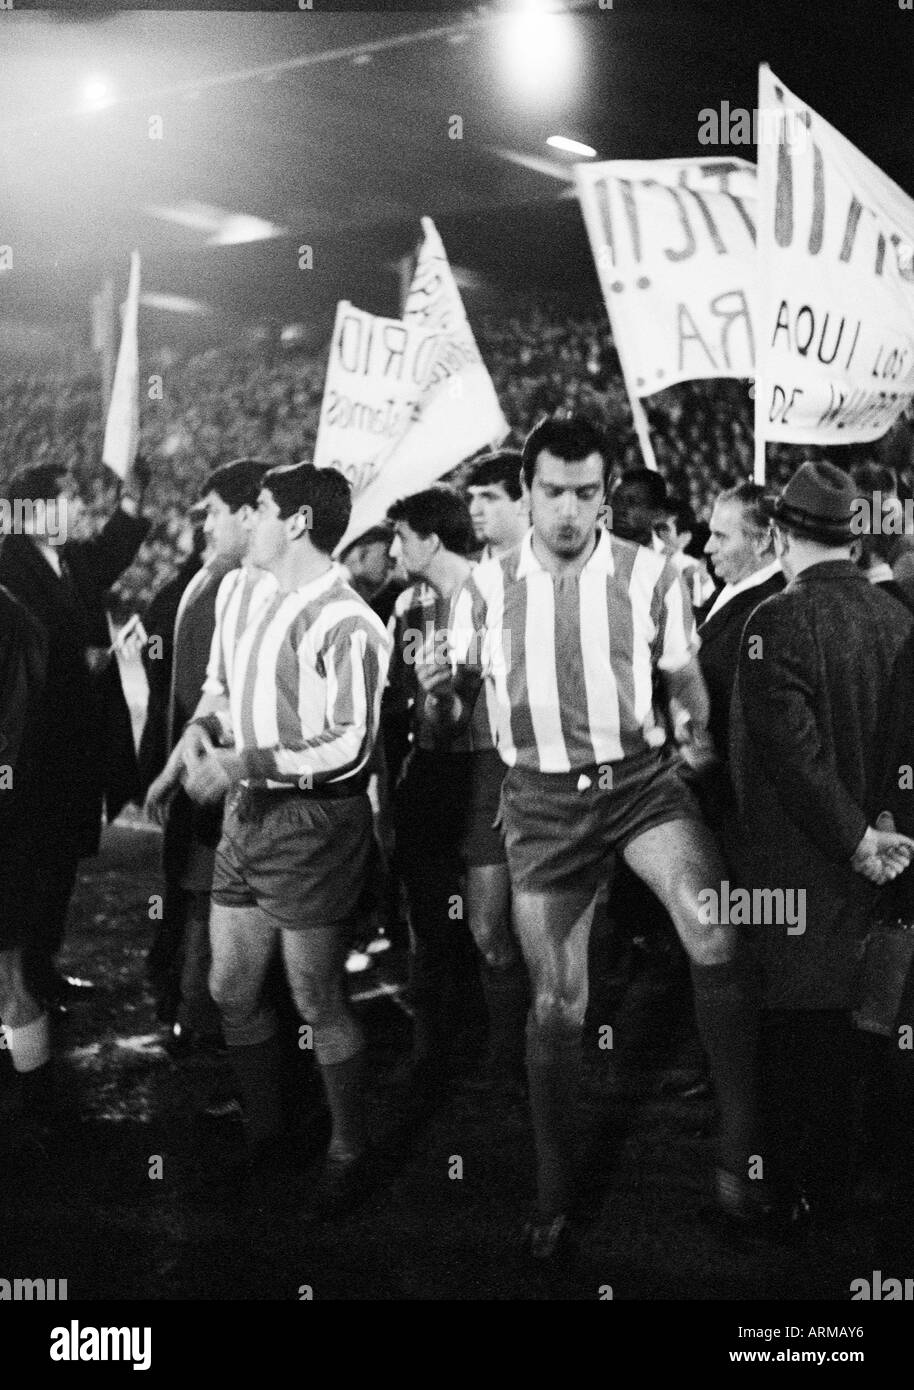 football, European Cup Winners Cup, 1965/1966, quarter final, return leg, Borussia Dortmund versus Atletico Madrid 1:0, Stadium Rote Erde in Dortmund, the Madrid team comes in the stadion, rejoicing football fans welcome their team with banners Stock Photo